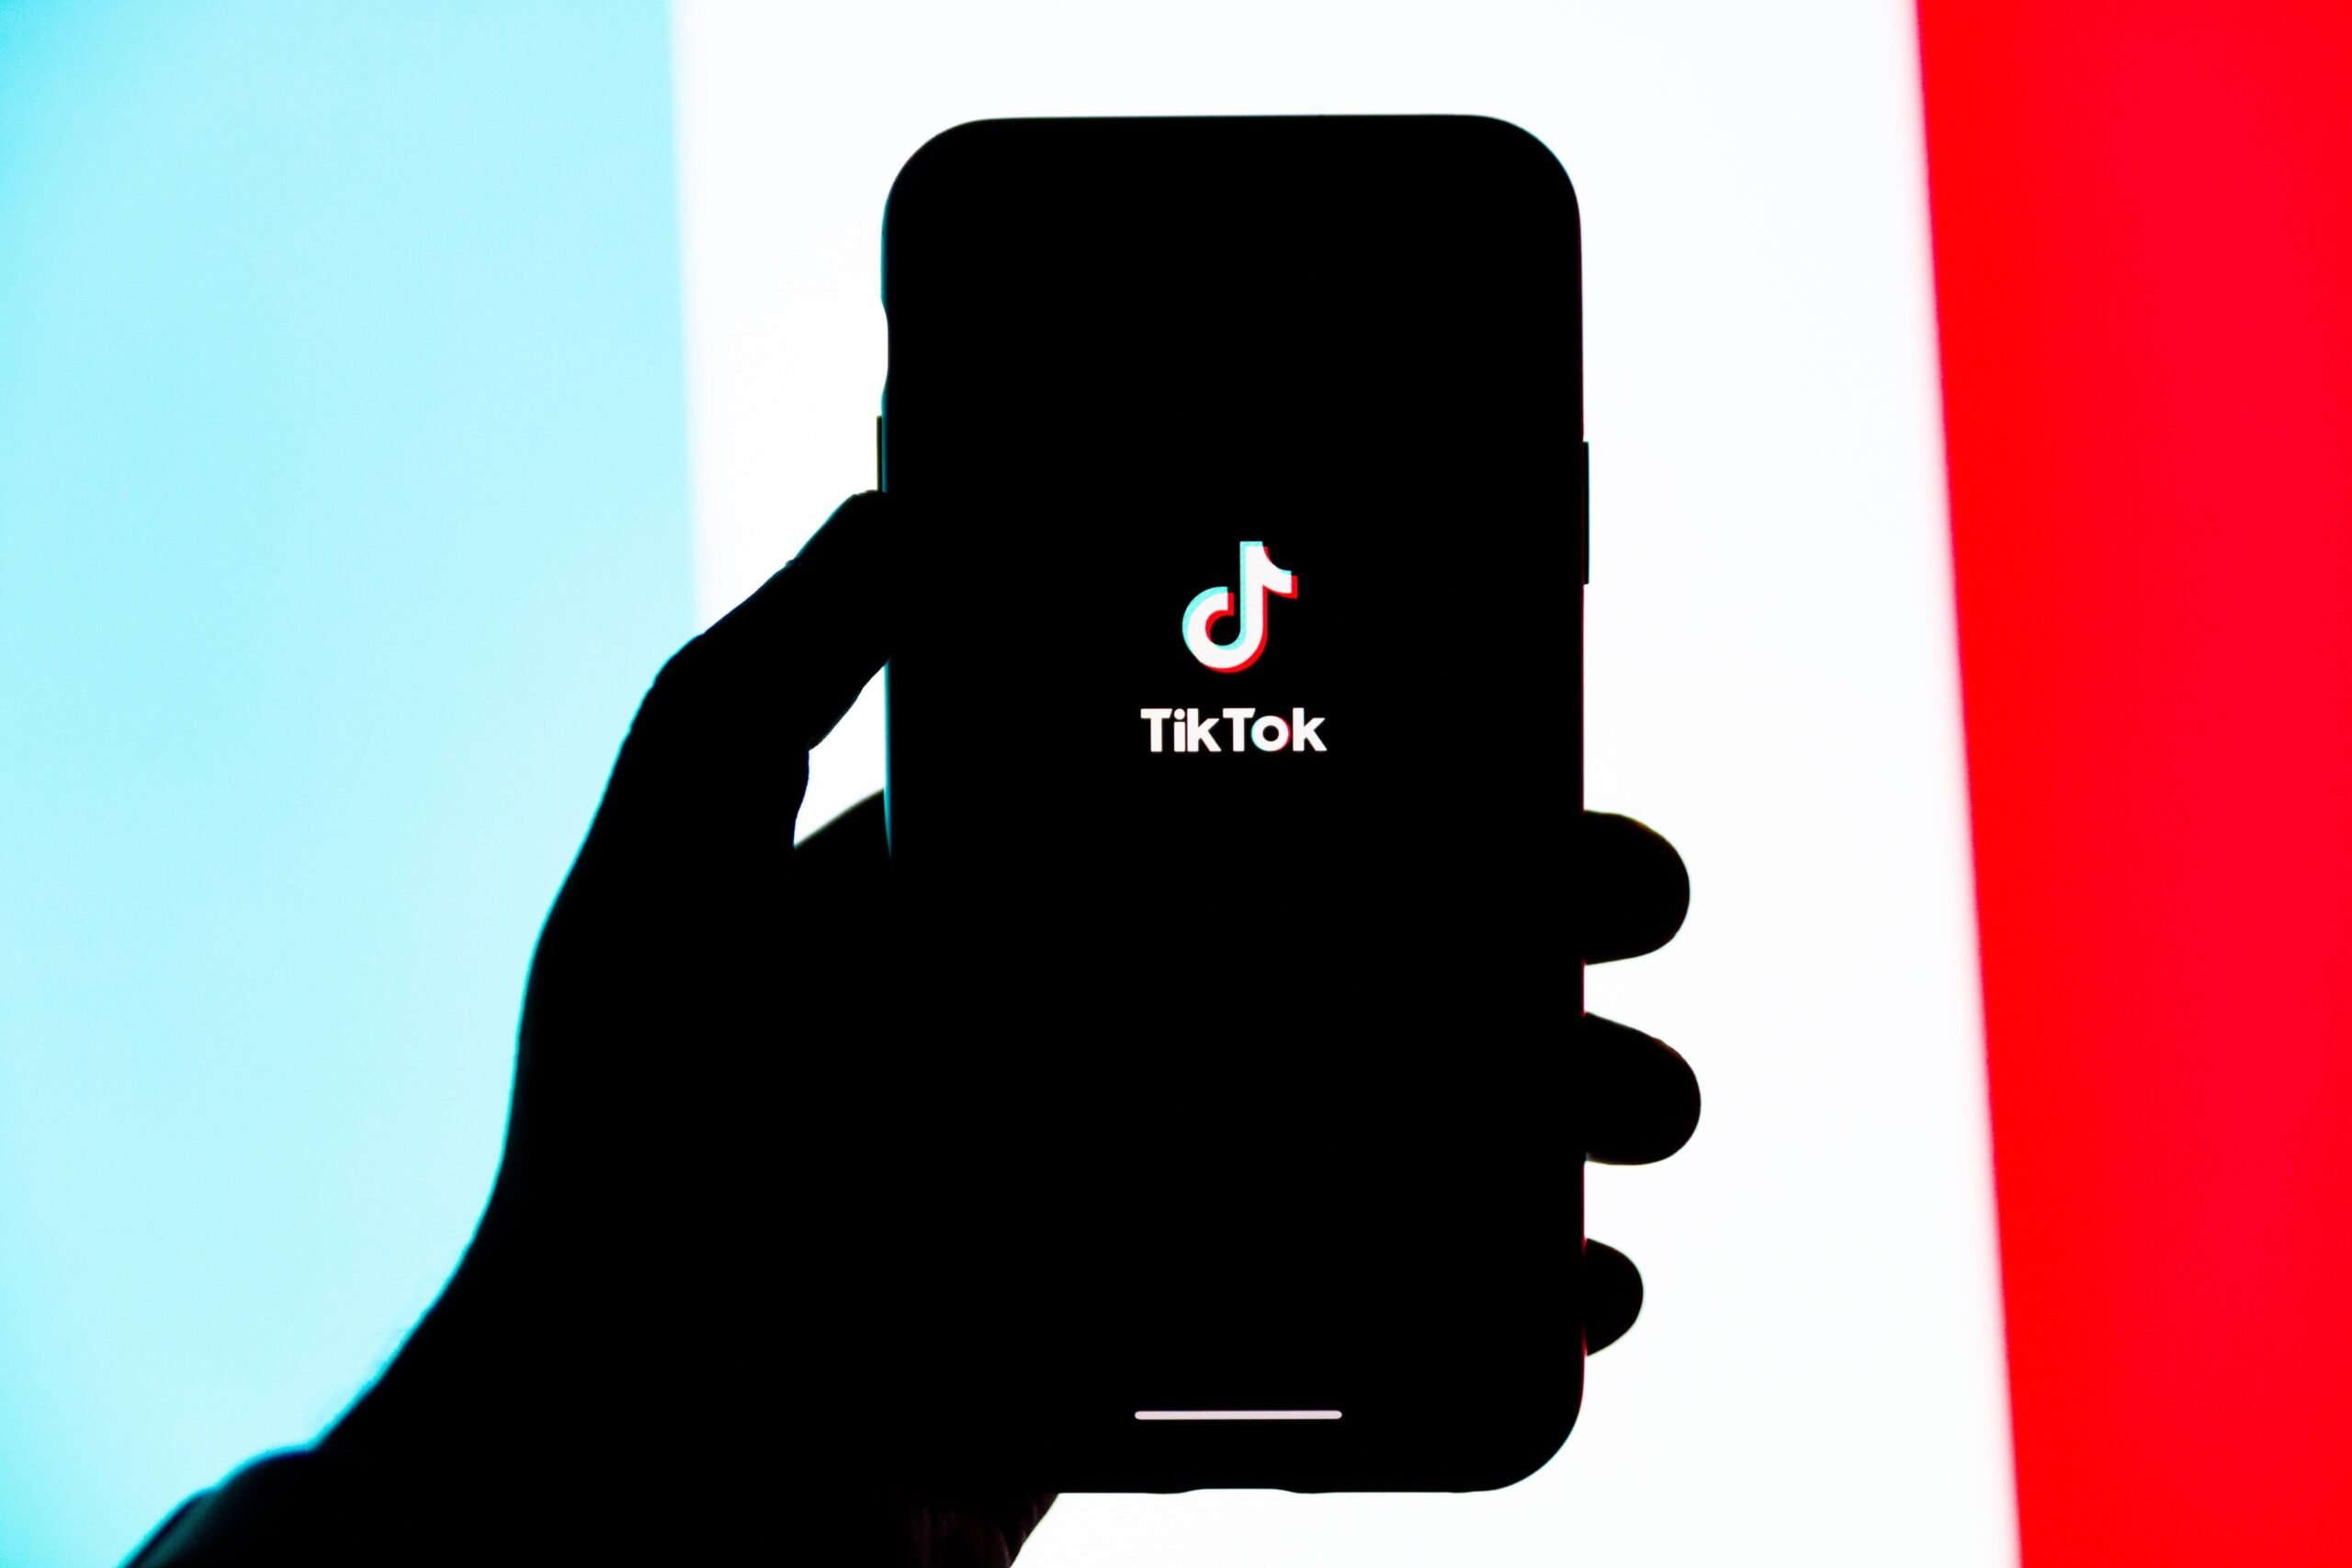 What is clear mode on TikTok?